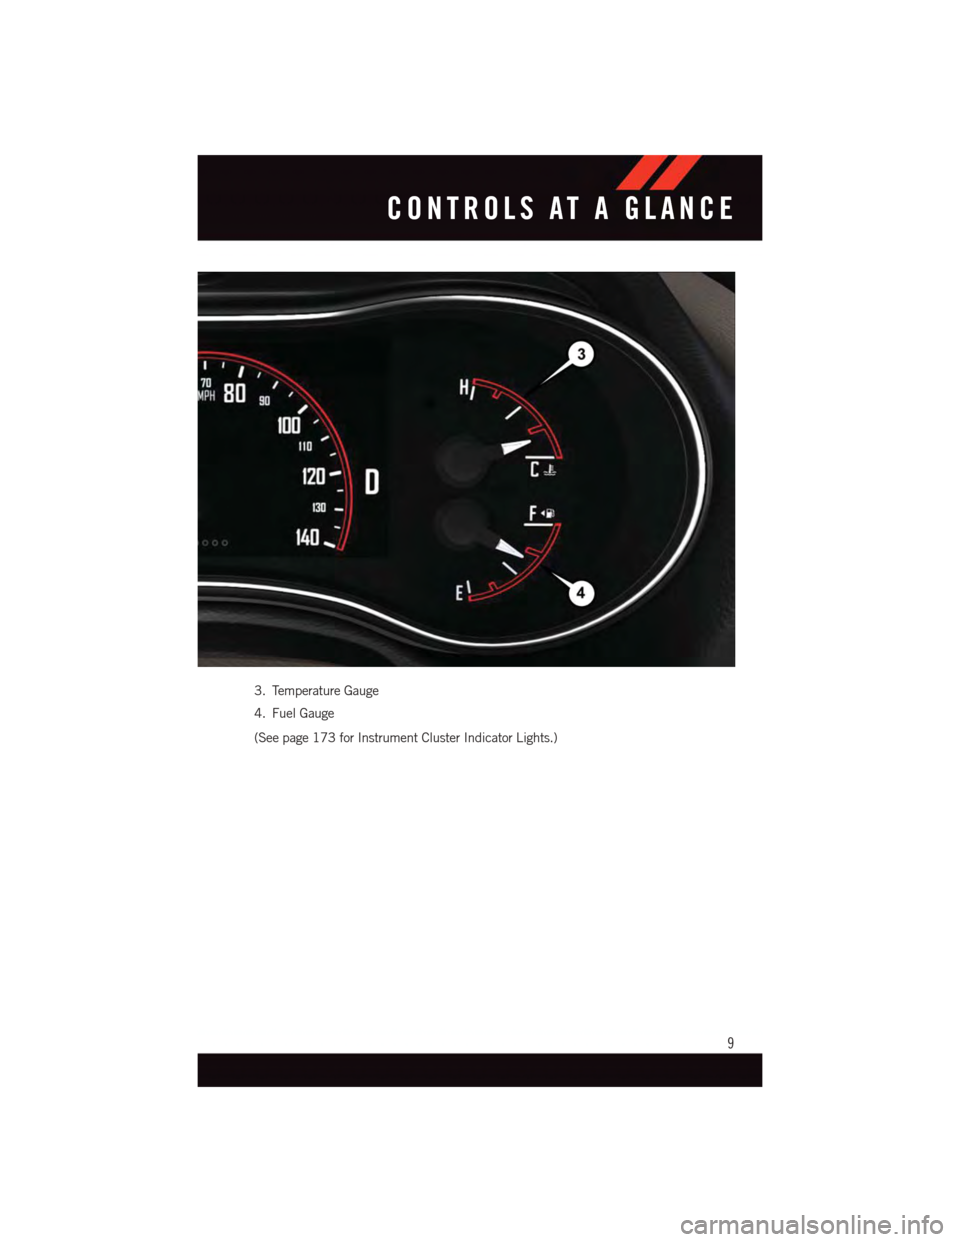 DODGE DURANGO 2015 3.G Owners Manual 3. Temperature Gauge
4. Fuel Gauge
(See page 173 for Instrument Cluster Indicator Lights.)
CONTROLS AT A GLANCE
9 